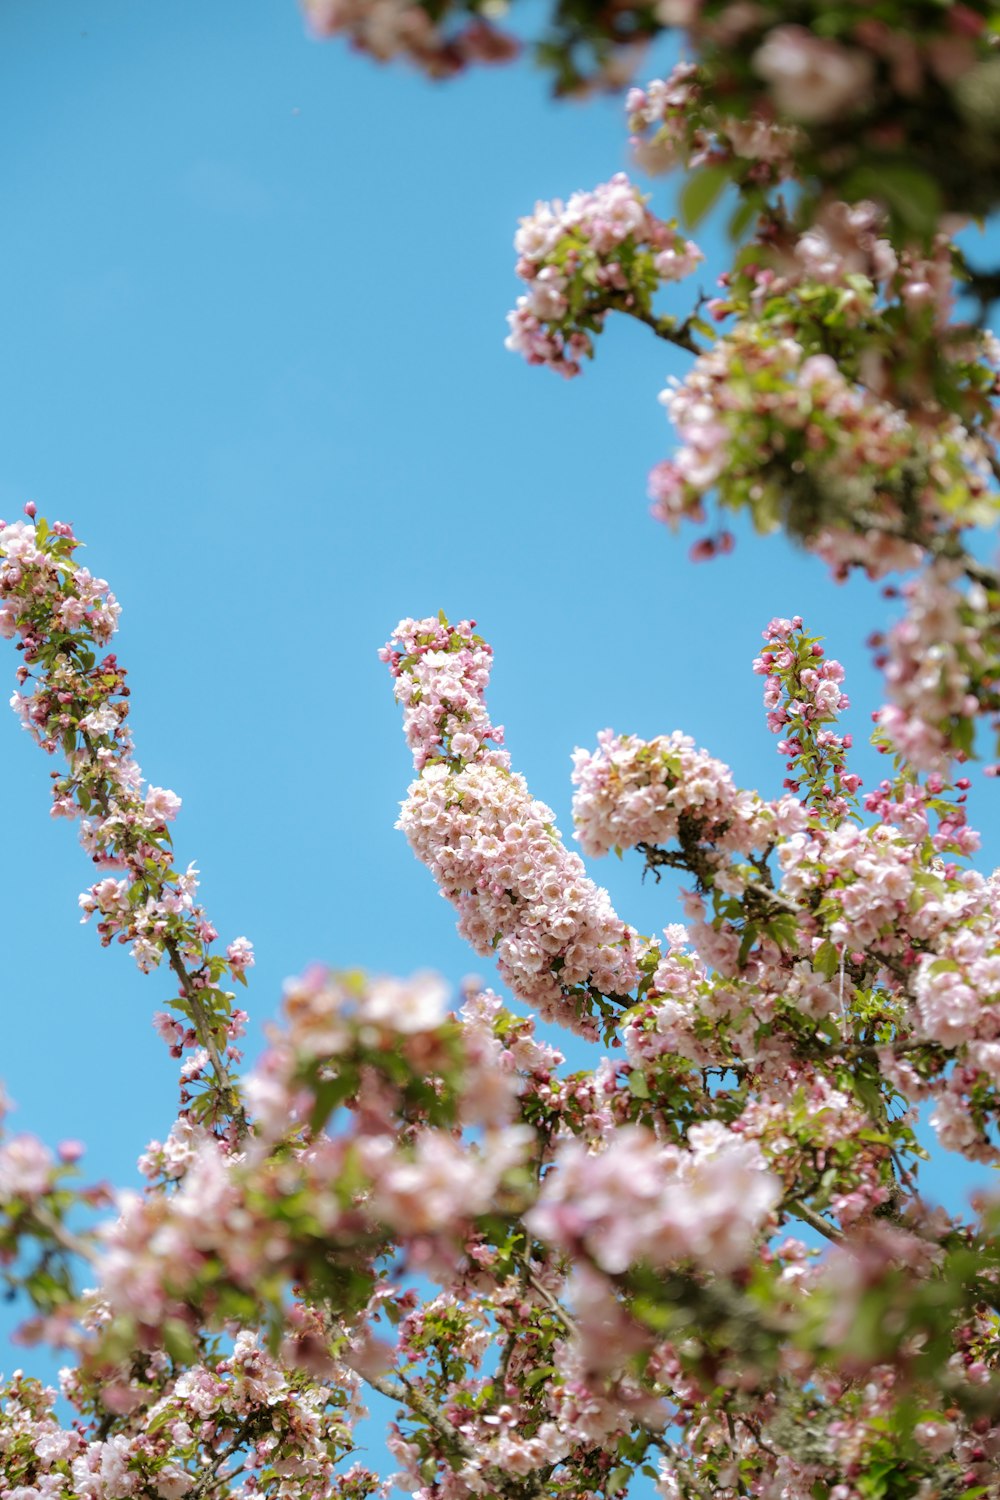 a bird sitting on top of a tree filled with pink flowers